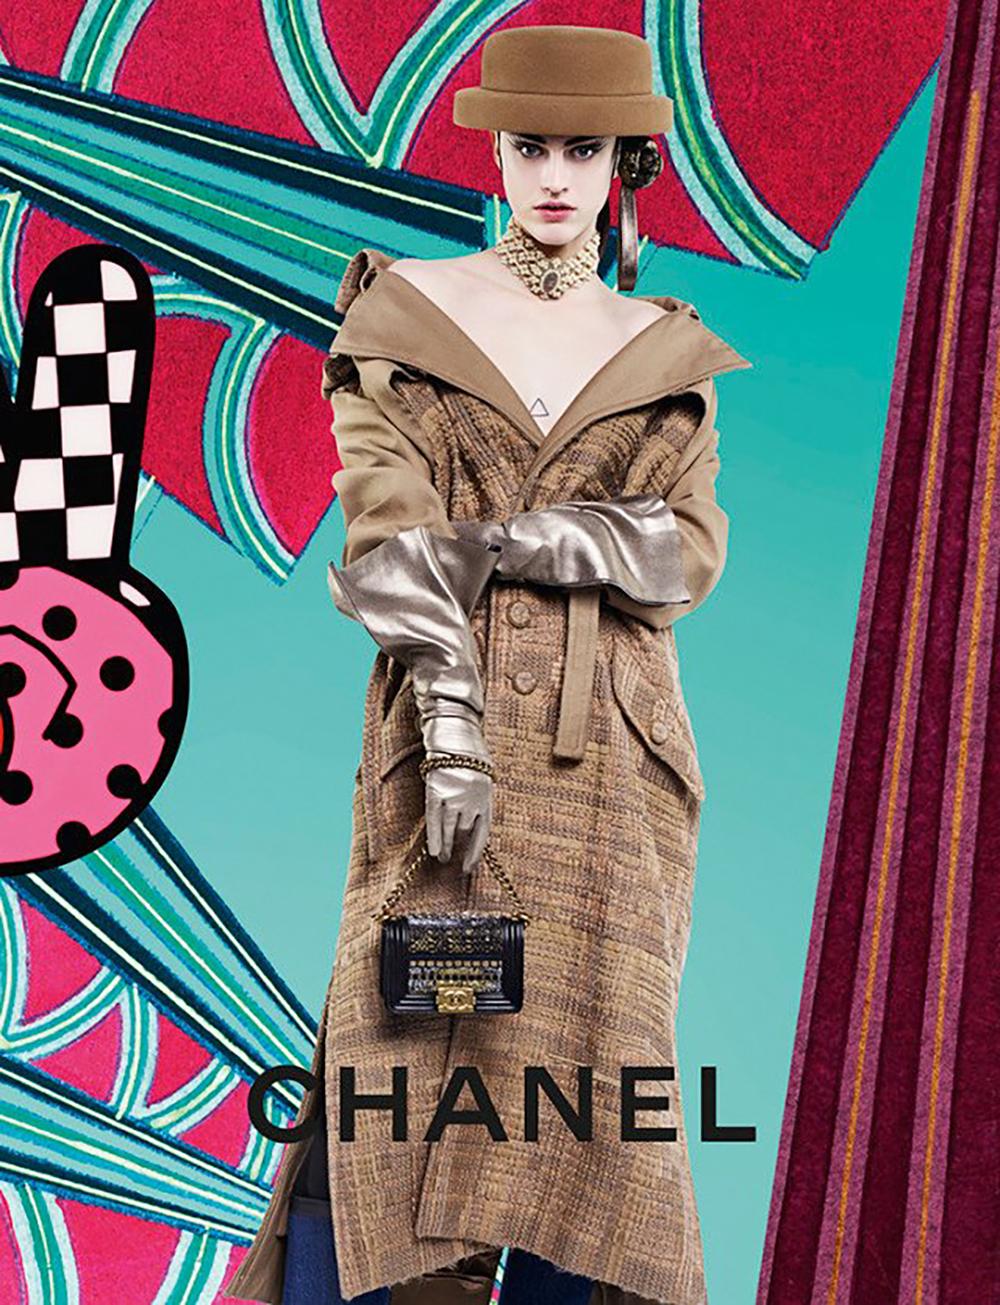 Luxurious Chanel beige trench made of most precious Lesage ribbon tweed!
Retail price over 14,000$
As seen in Ad Campaign and on Billboards around the world!
- CC logo tweed buttons
- tweed belt with CC buckle
- tonal silk lining
Size mark 34 FR.